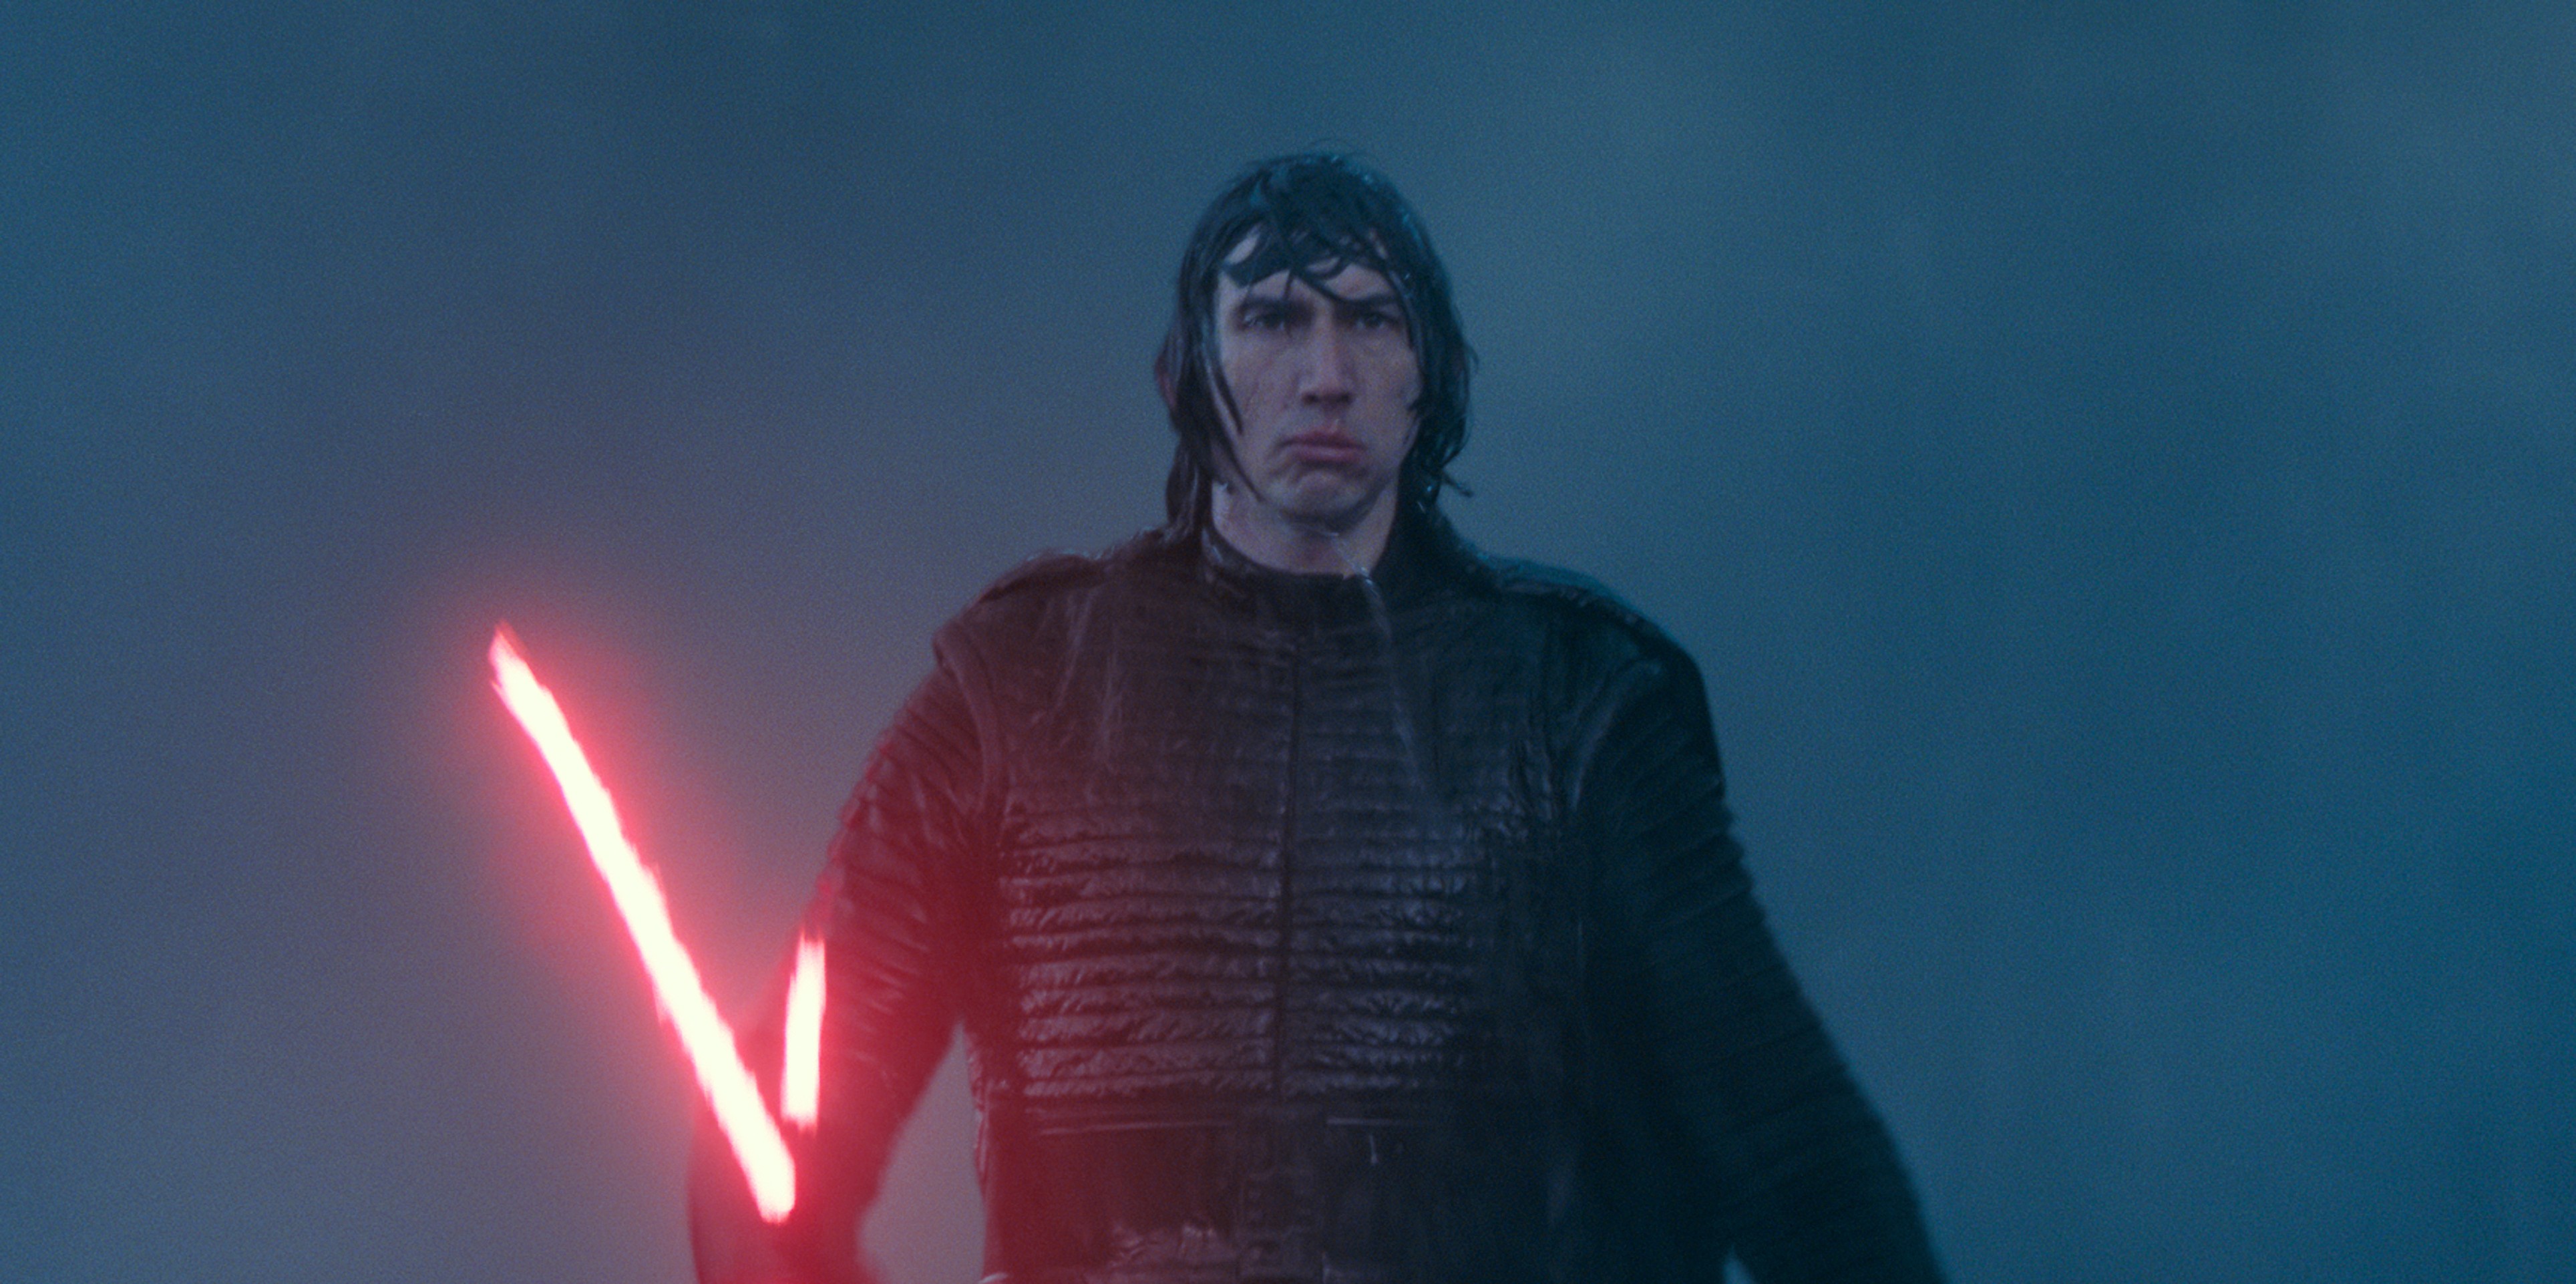 Review: Star Wars: The Last Jedi Is The Best Star Wars Movie By Default